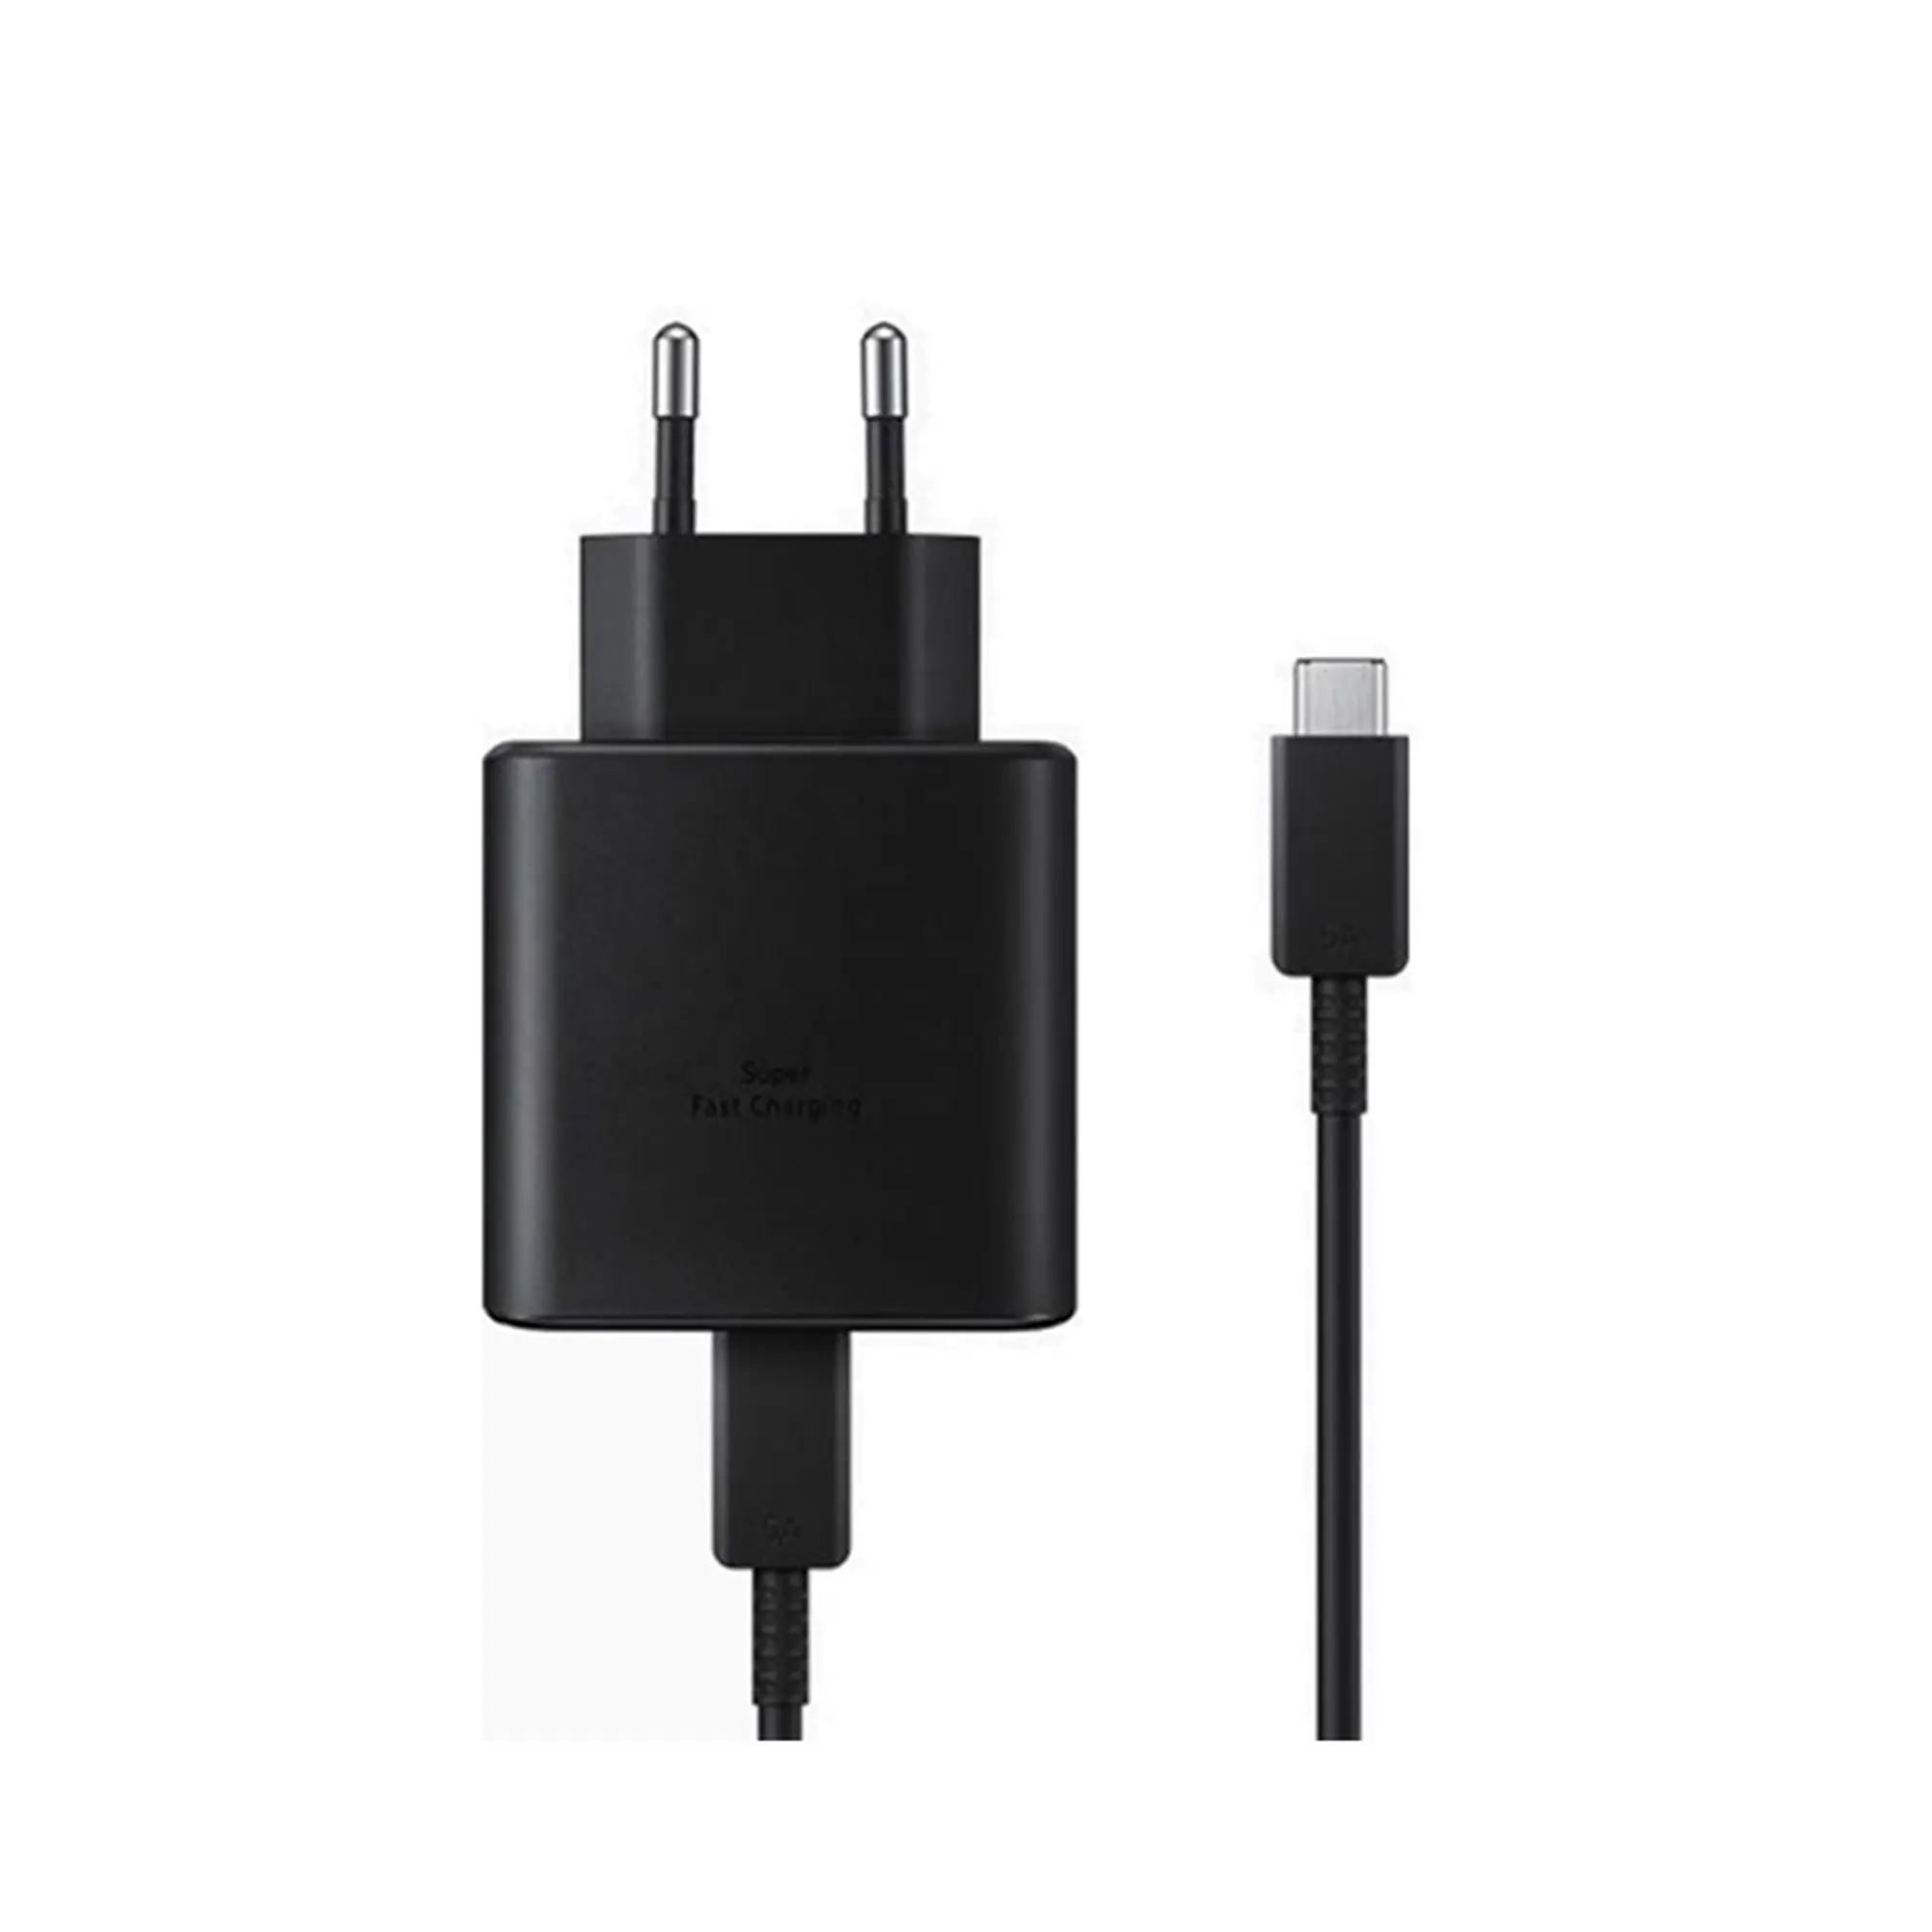 EP-TA800 KO EU US real Super quick charge type-c travel wall usb-c charger adapter 9V/2.77A 5V/3A charging for samsung galaxy